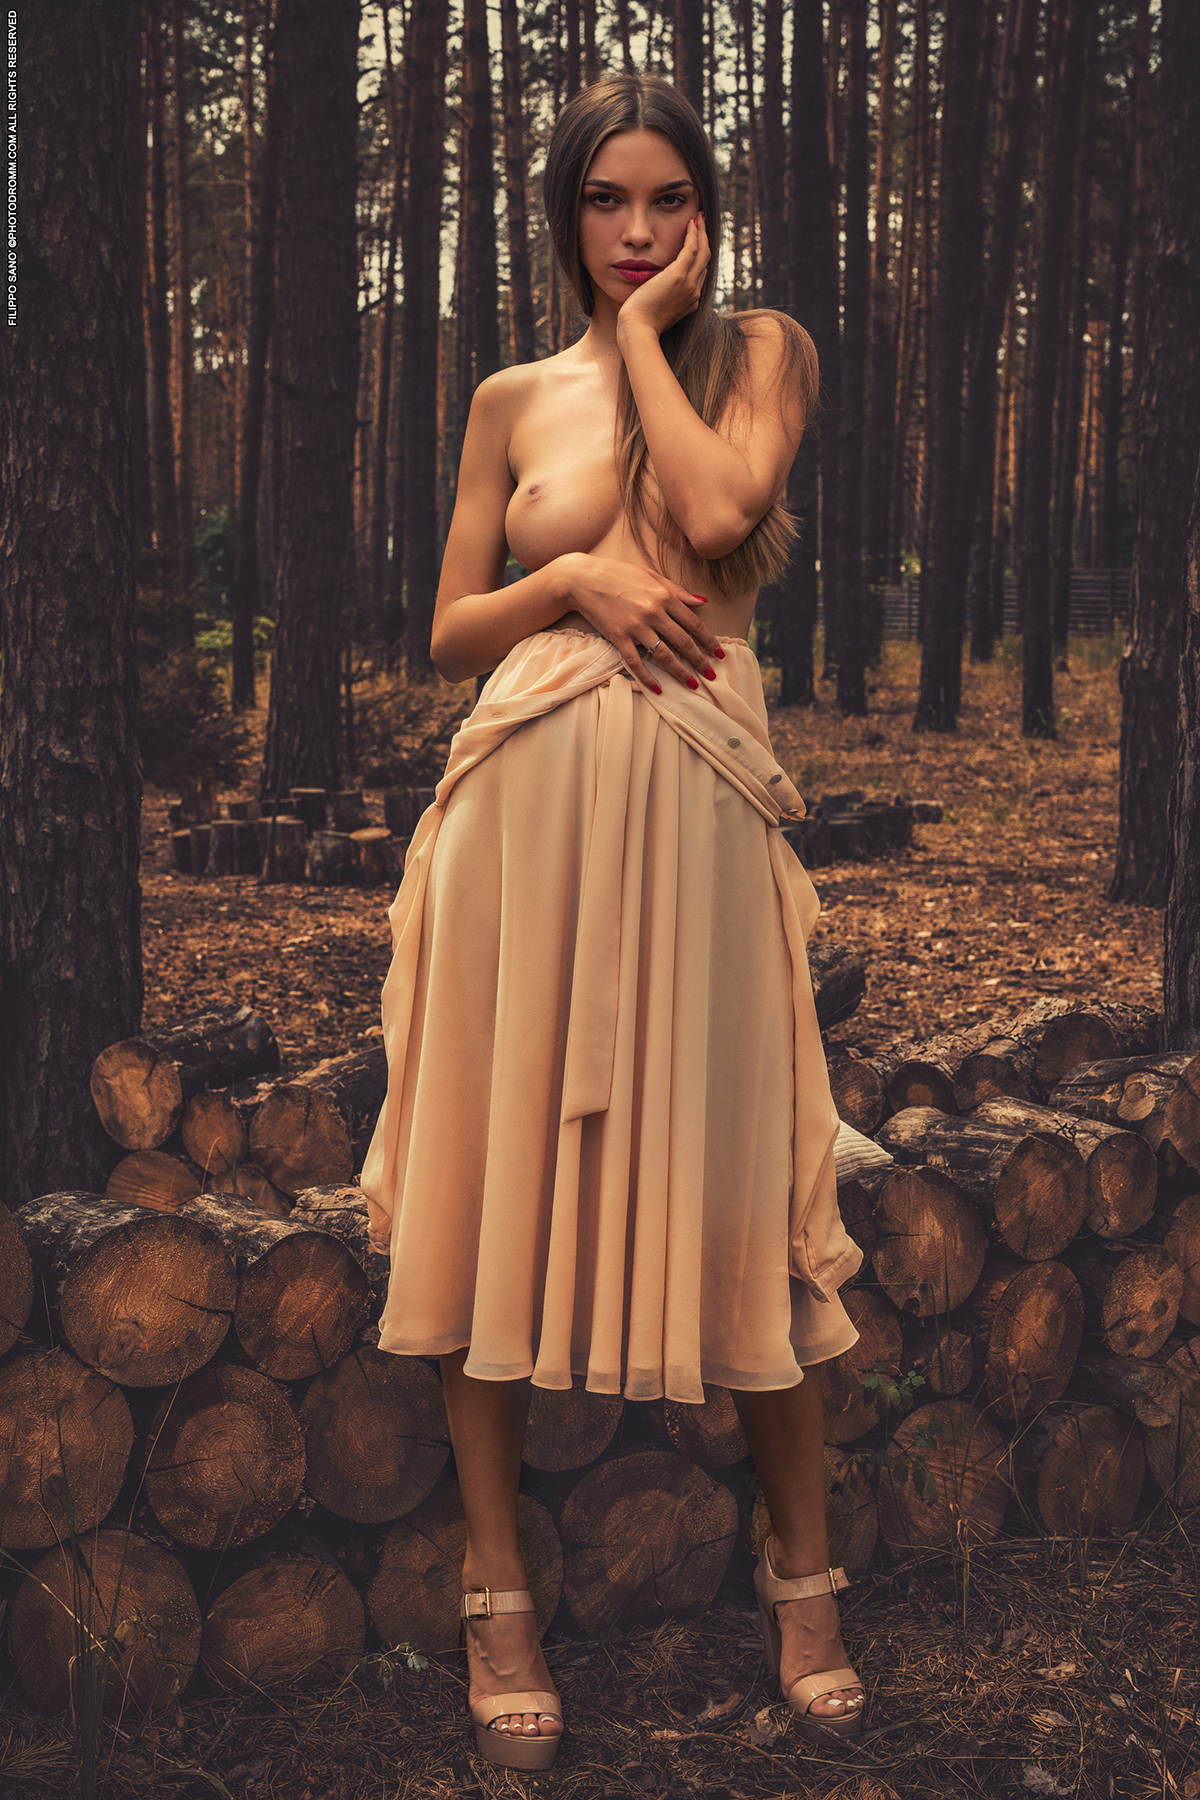 'In The Woods' with Alina via Photodromm - Pic #19